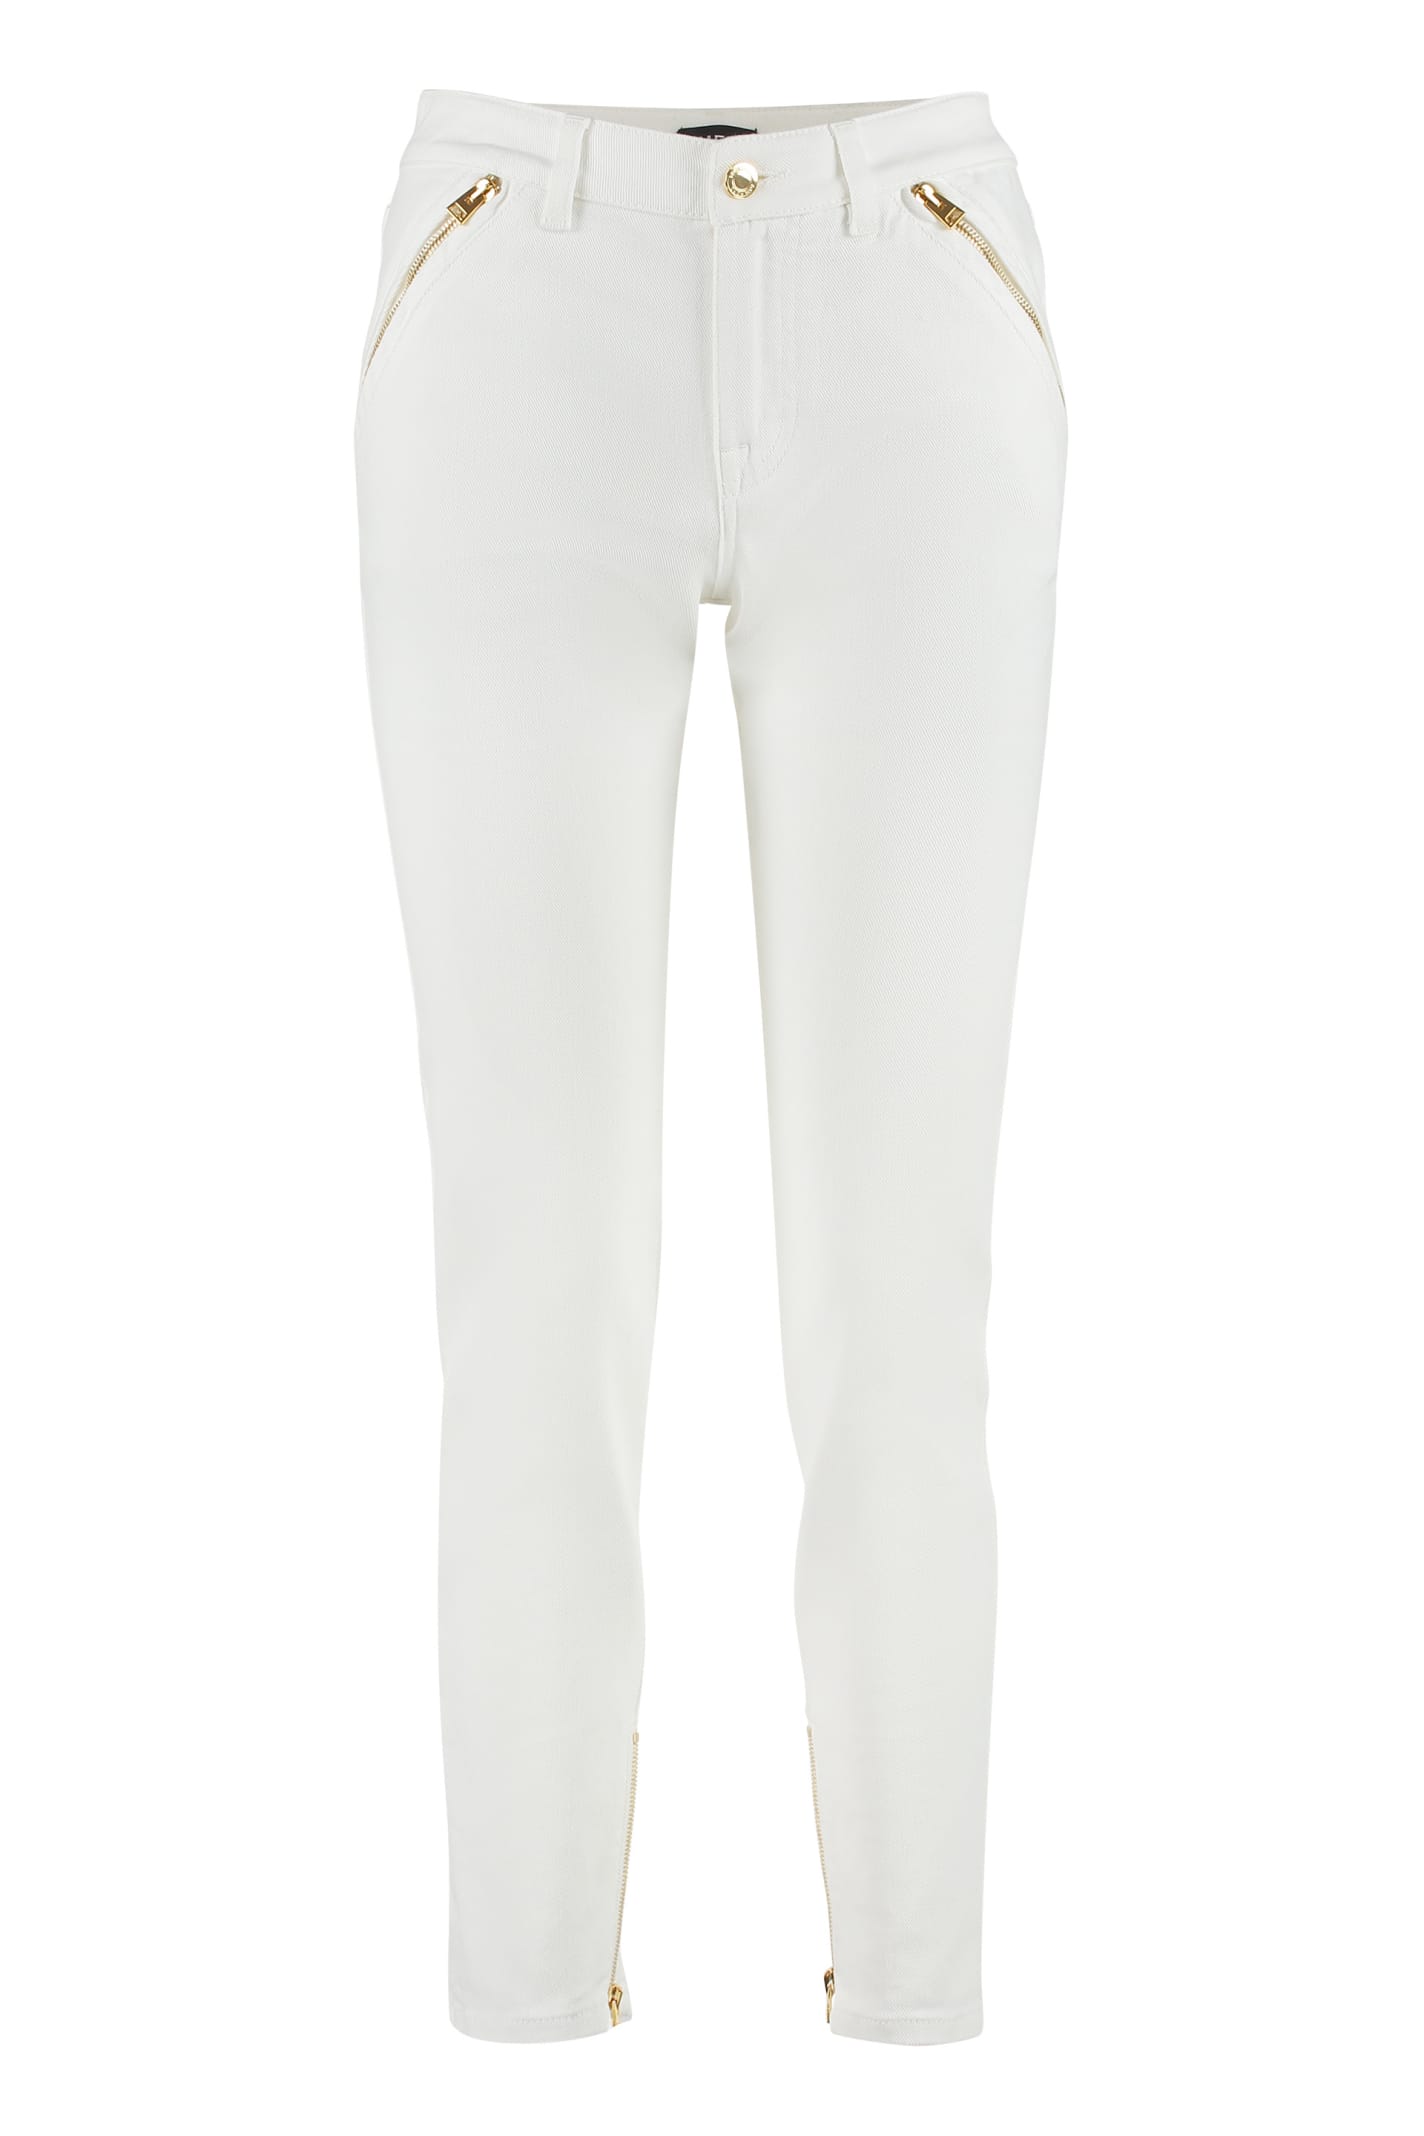 TOM FORD HIGH-RISE SKINNY-FIT JEANS